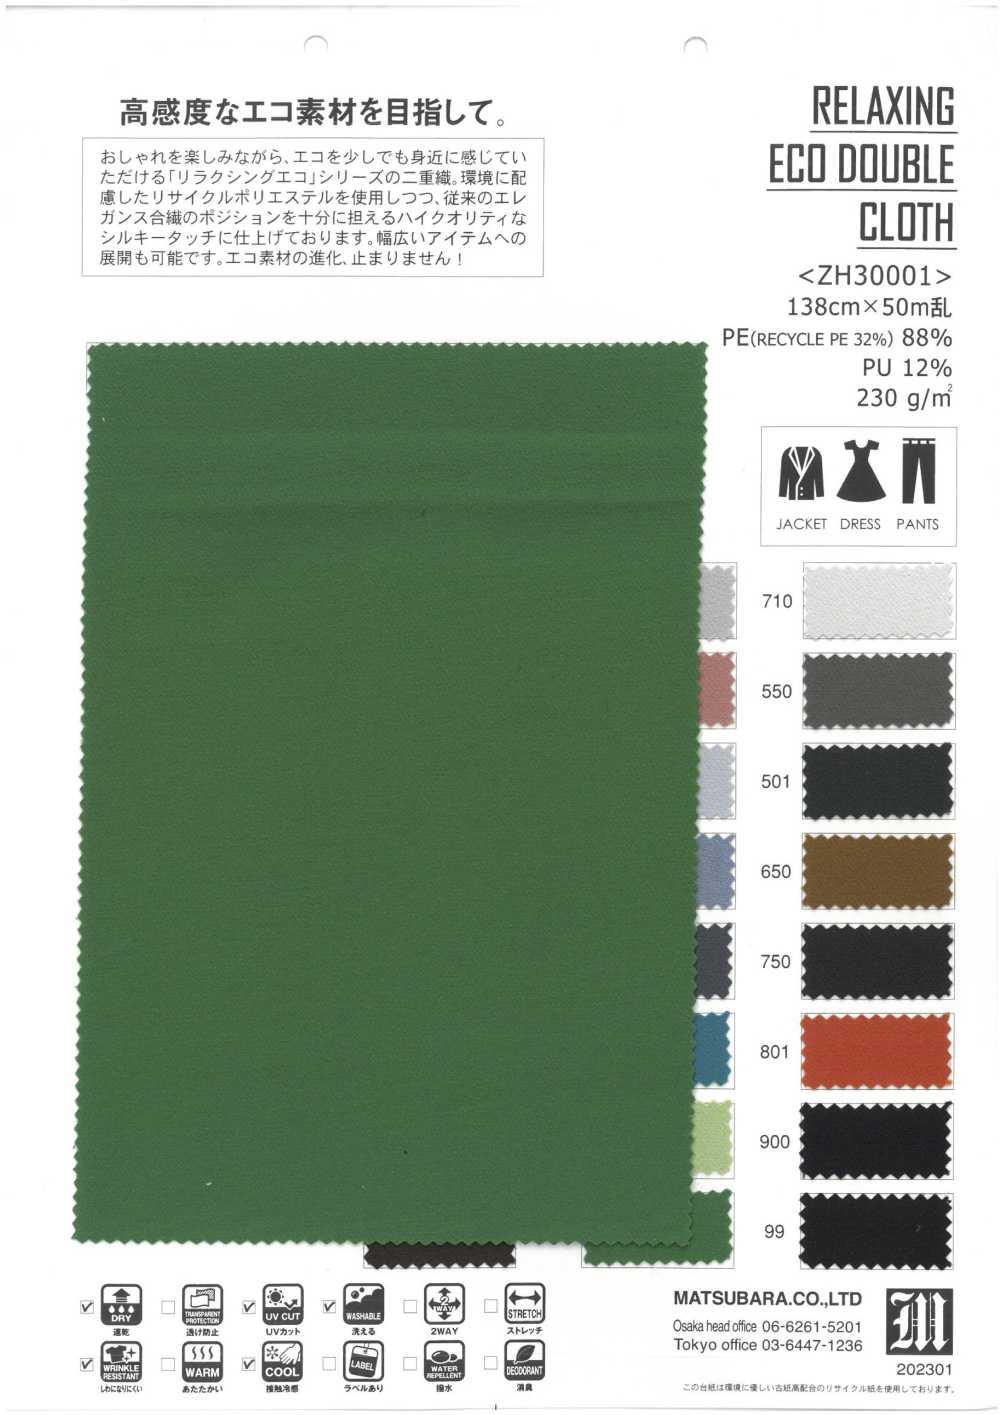 ZH30001 RELAXING ECO DOUBLE CLOTH[生地] 松原